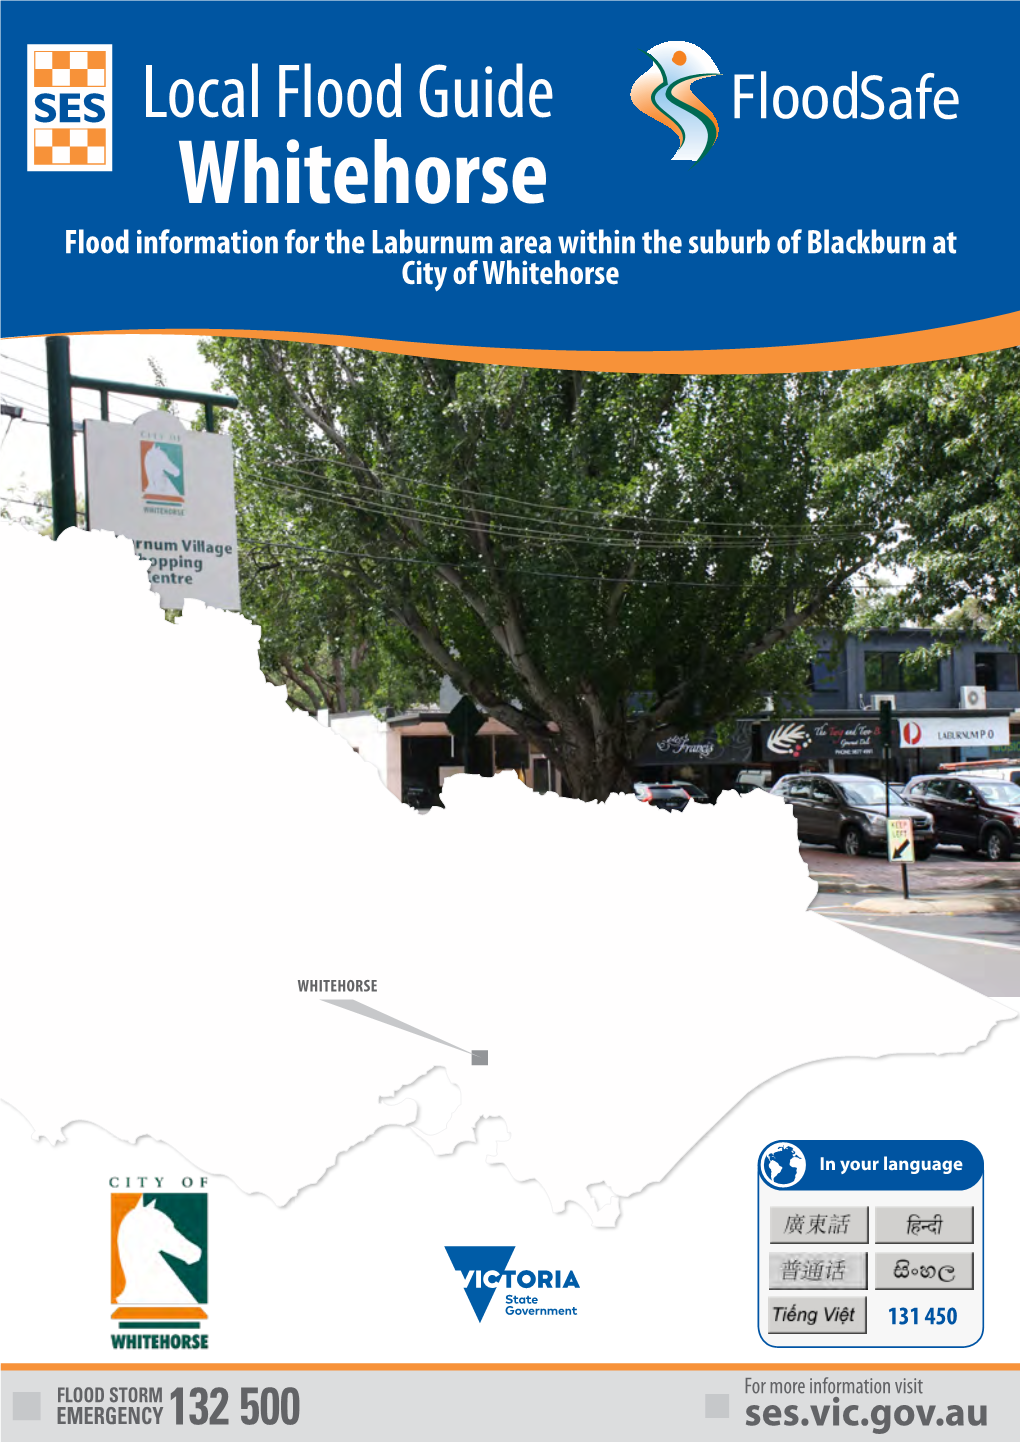 Local Flood Guide Safe Whitehorse Flood Information for the Laburnum Area Within the Suburb of Blackburn at City of Whitehorse